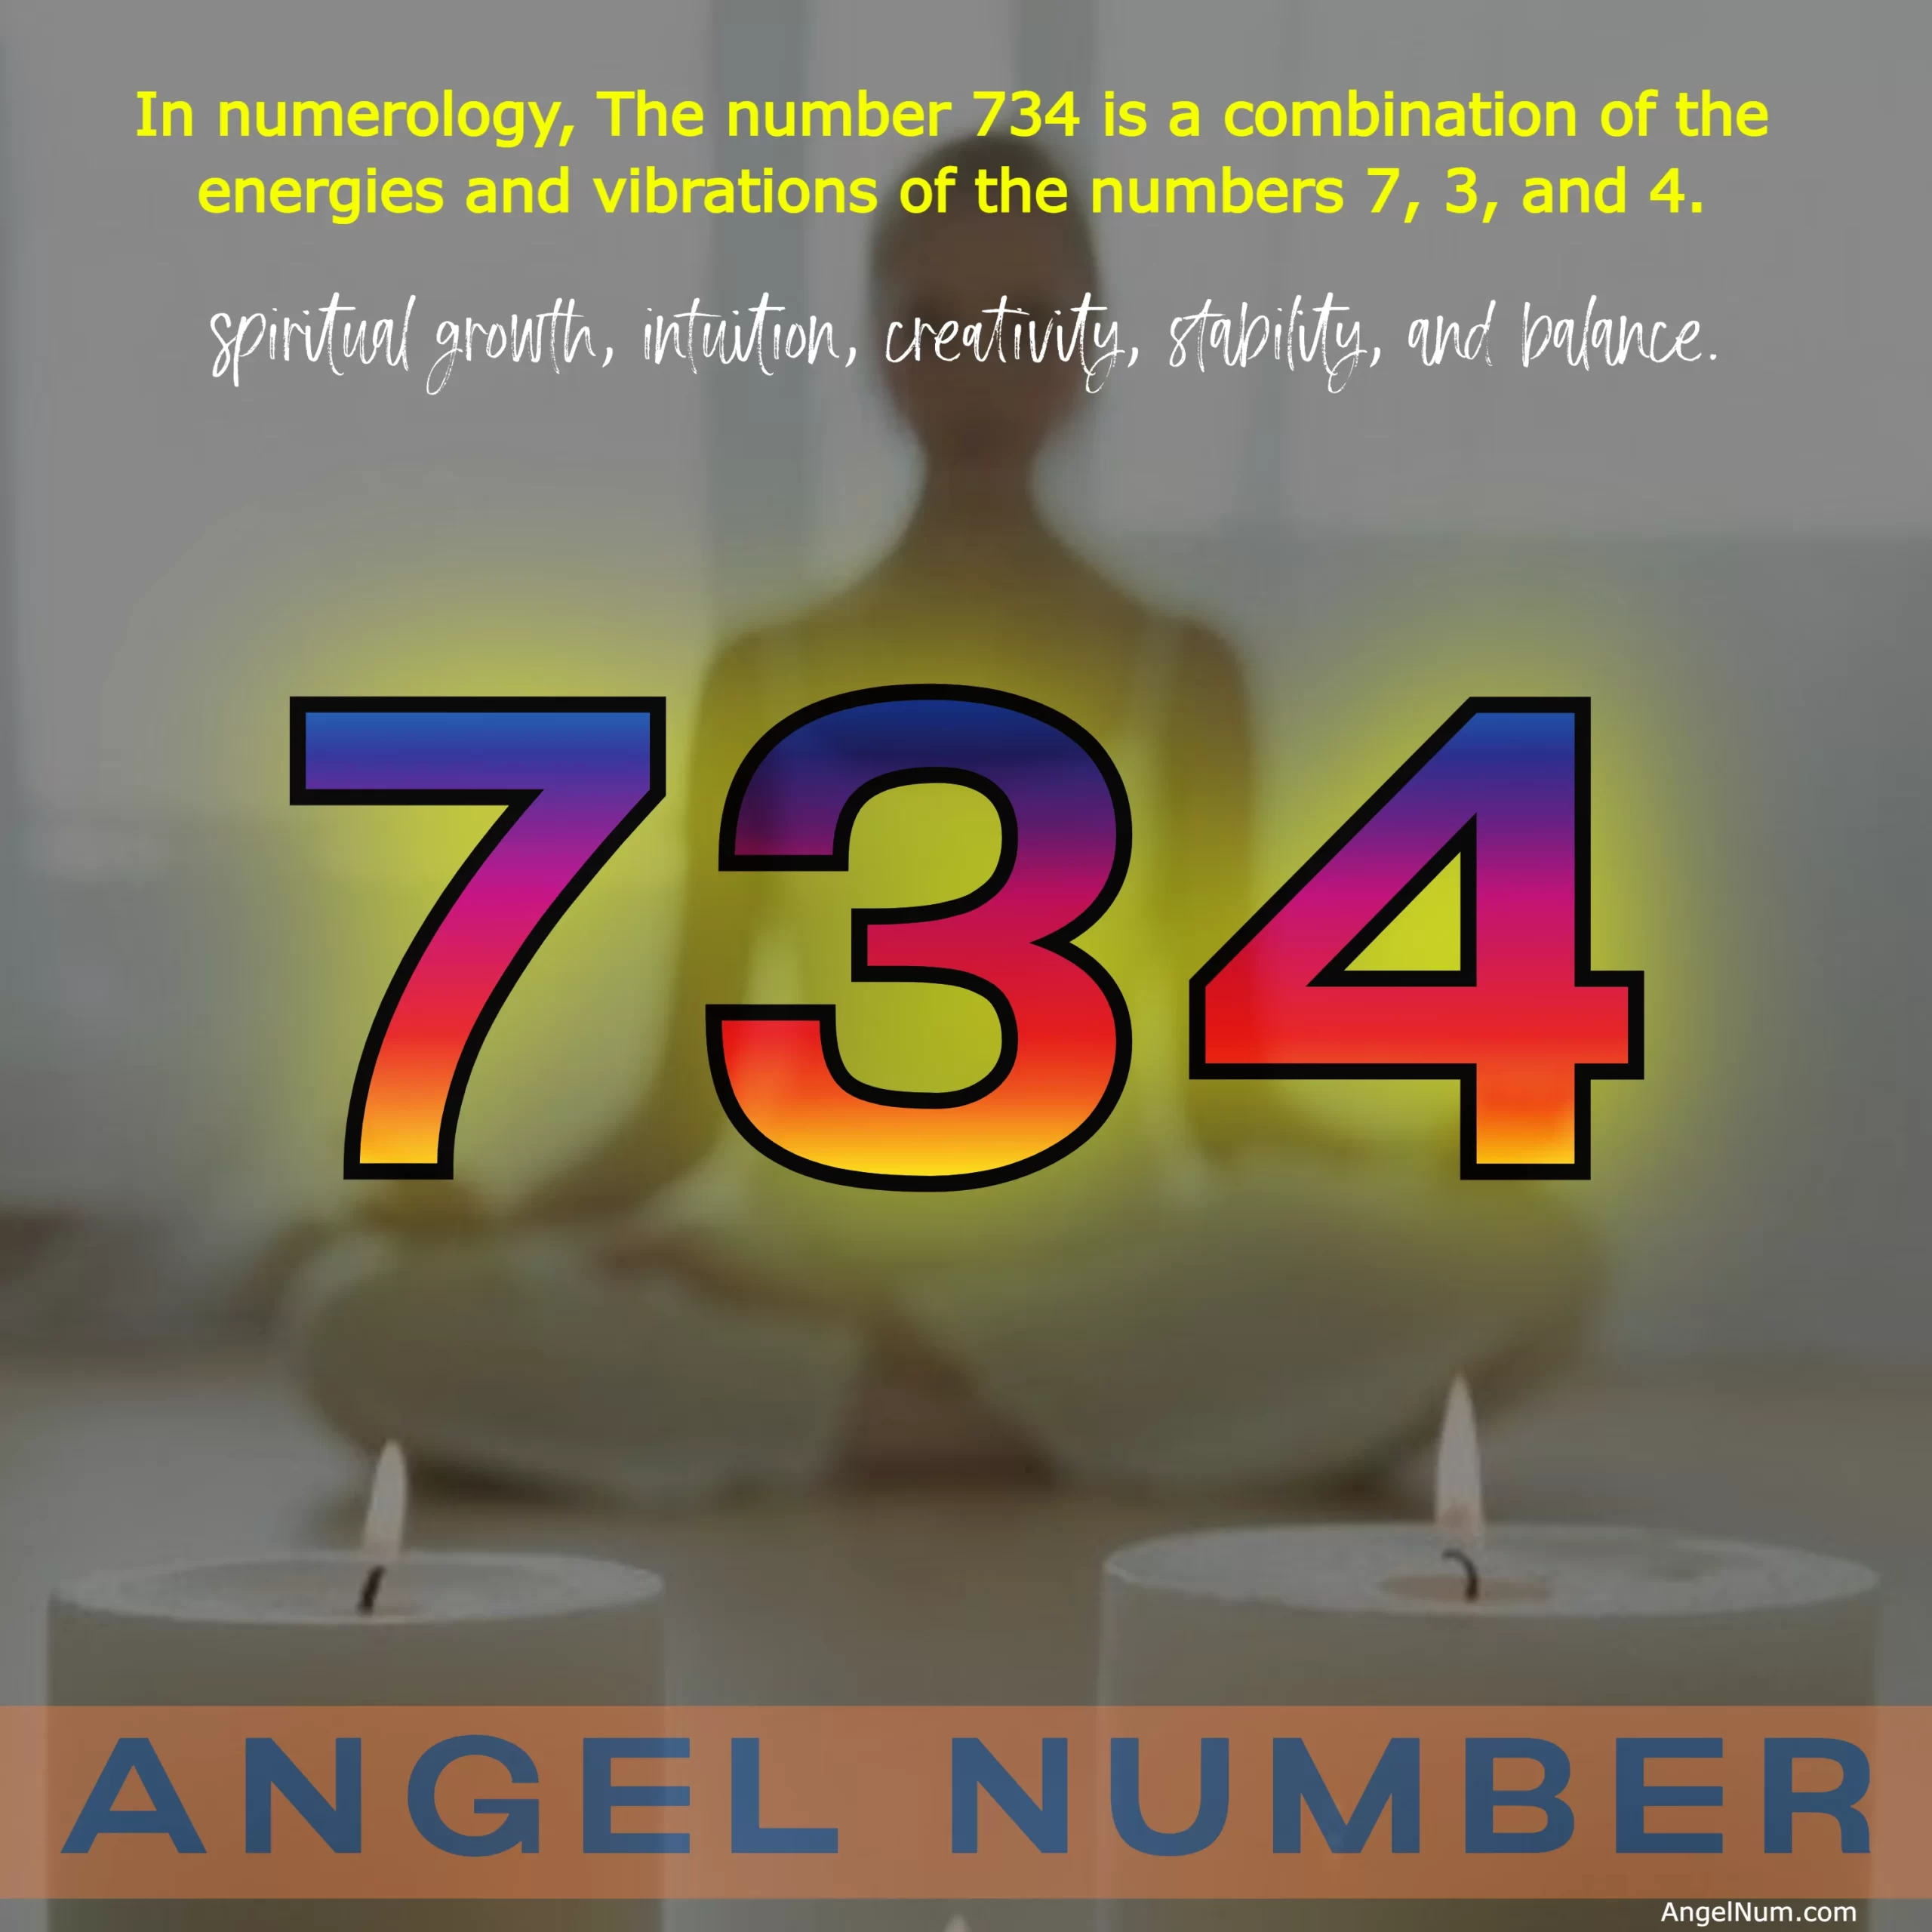 Angel Number 734: Unlocking Spiritual Growth and Stability